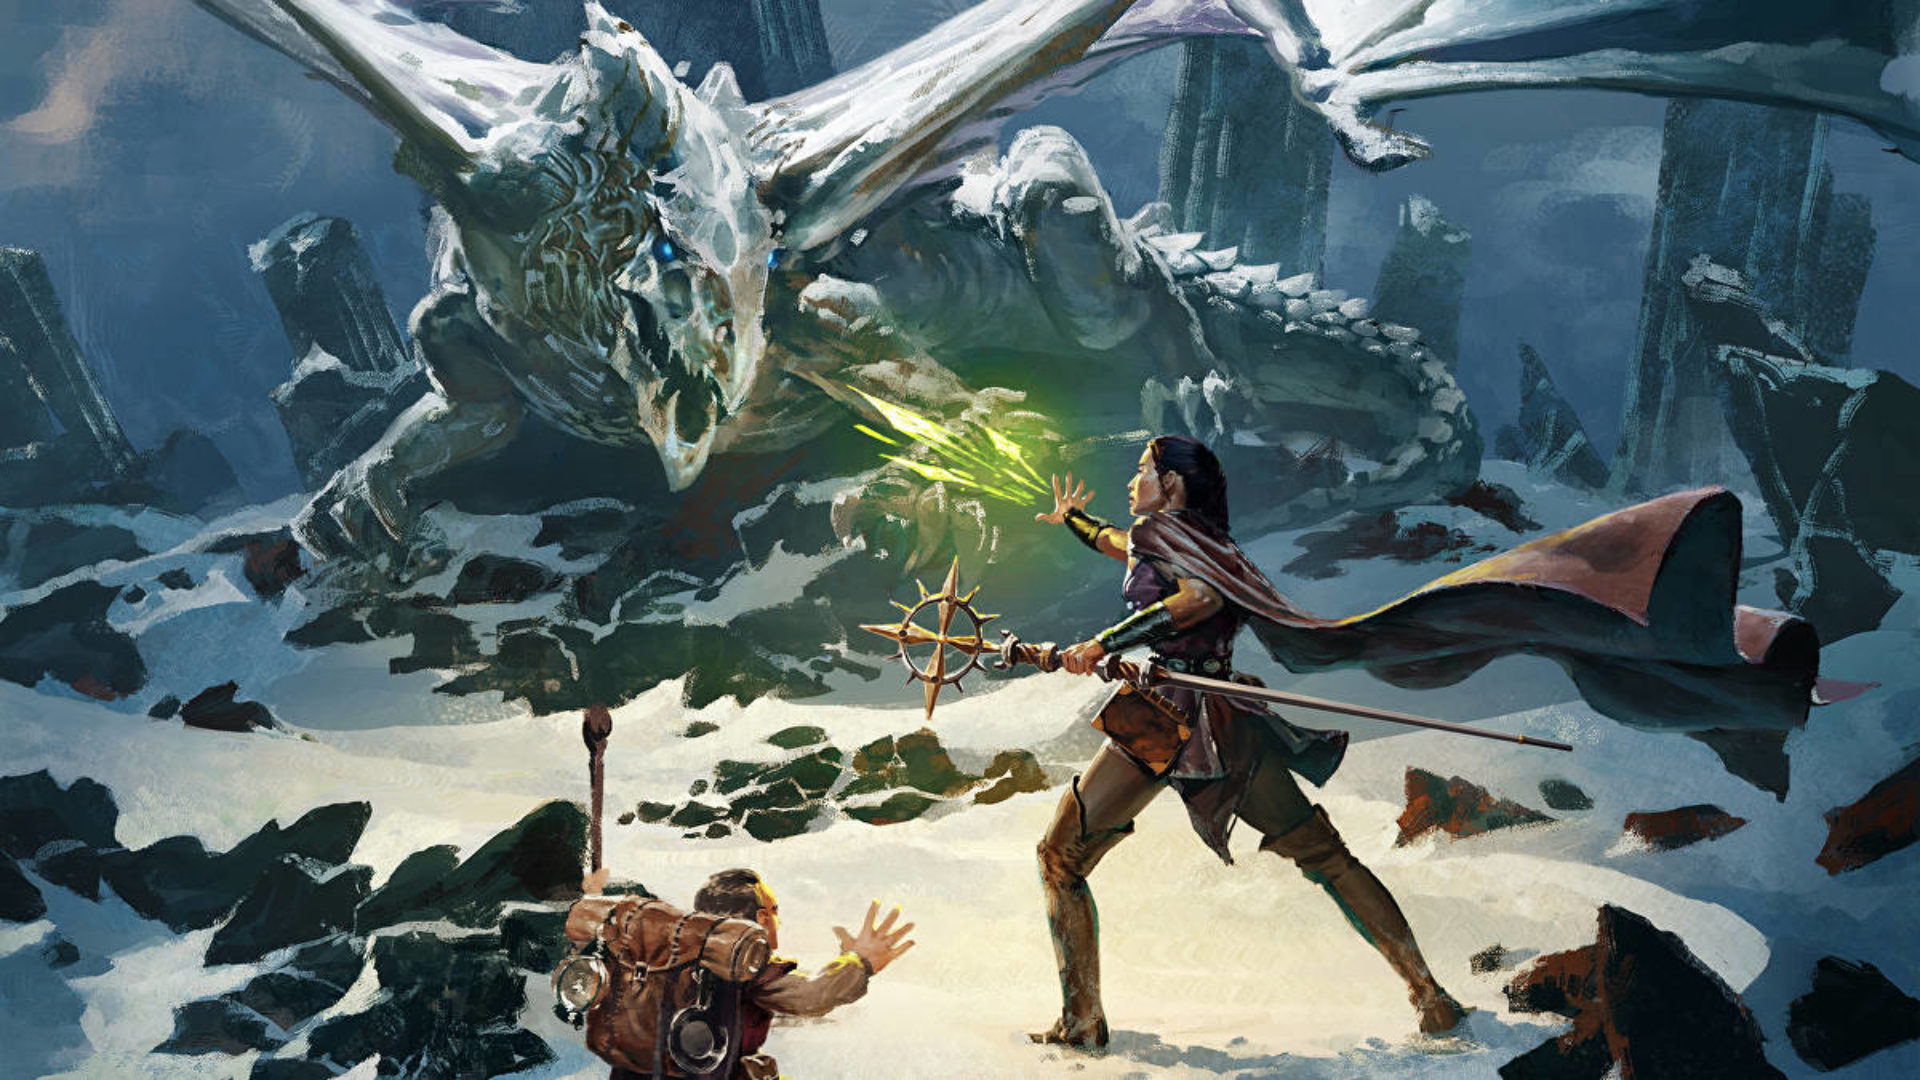 An open-world game on the Dungeons & Dragons franchise is in development

